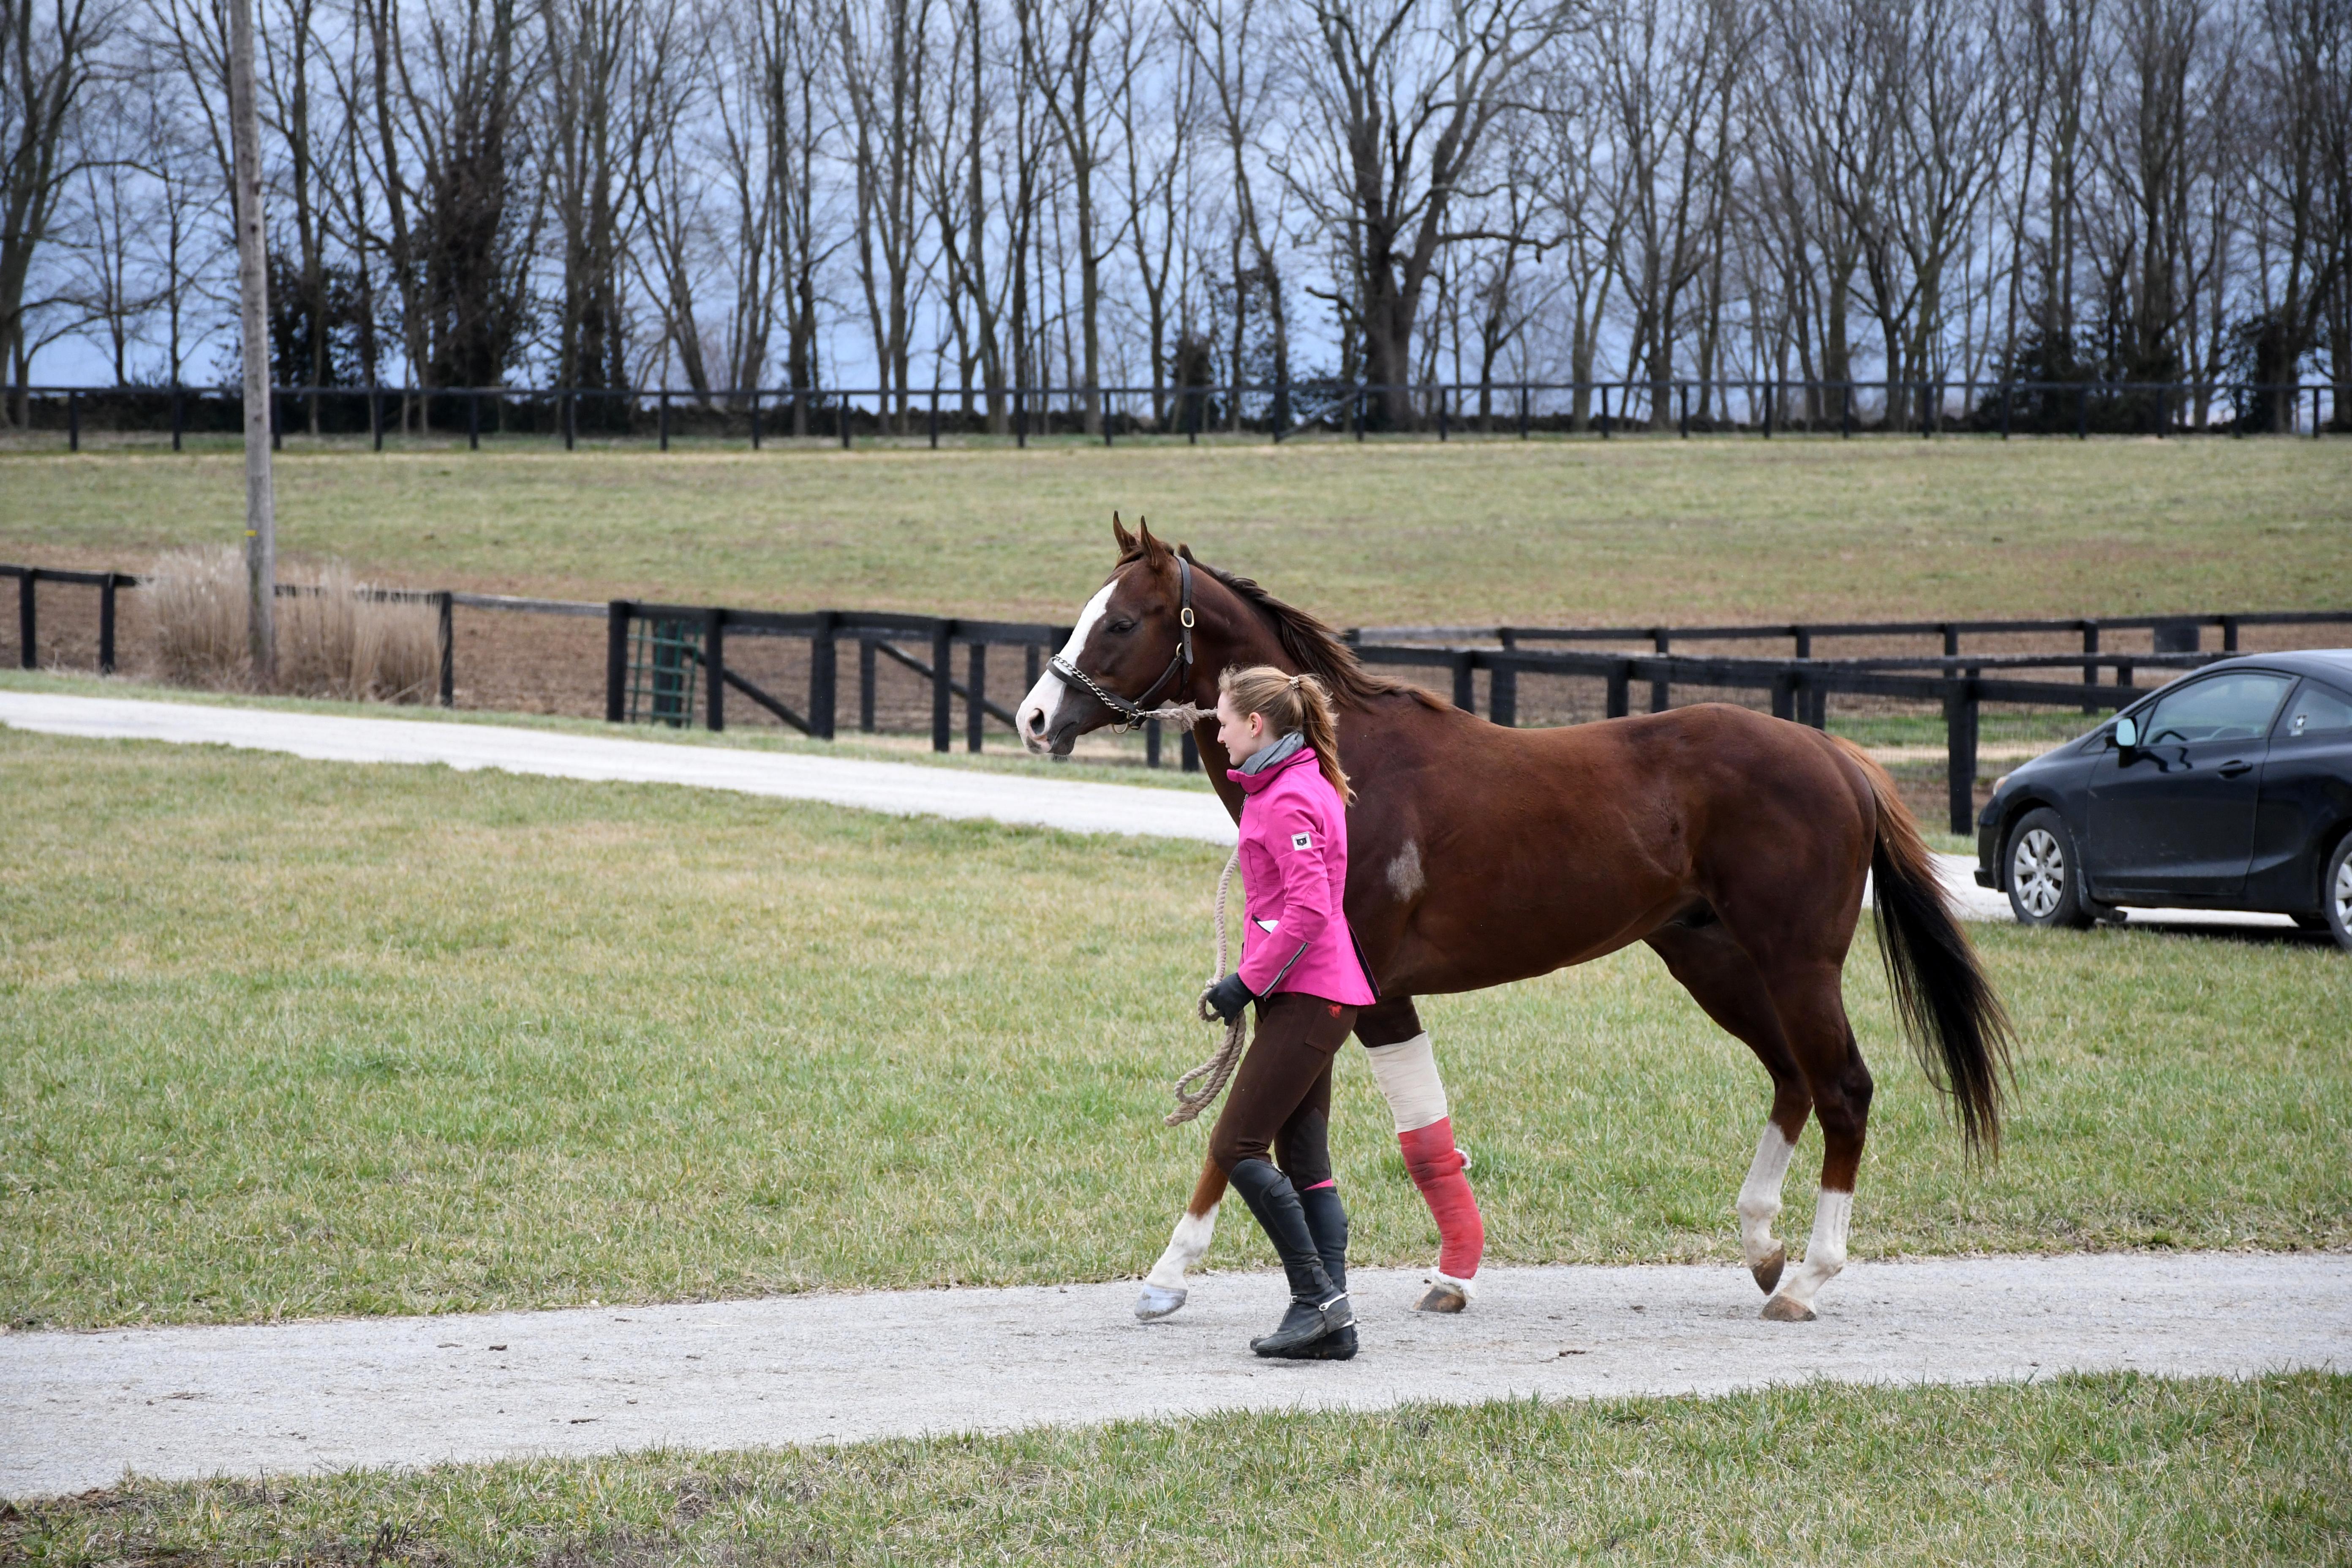 London House arriving at New Vocations’ Kentucky facility. (Melissa Bauer-Herzog/America's Best Racing)